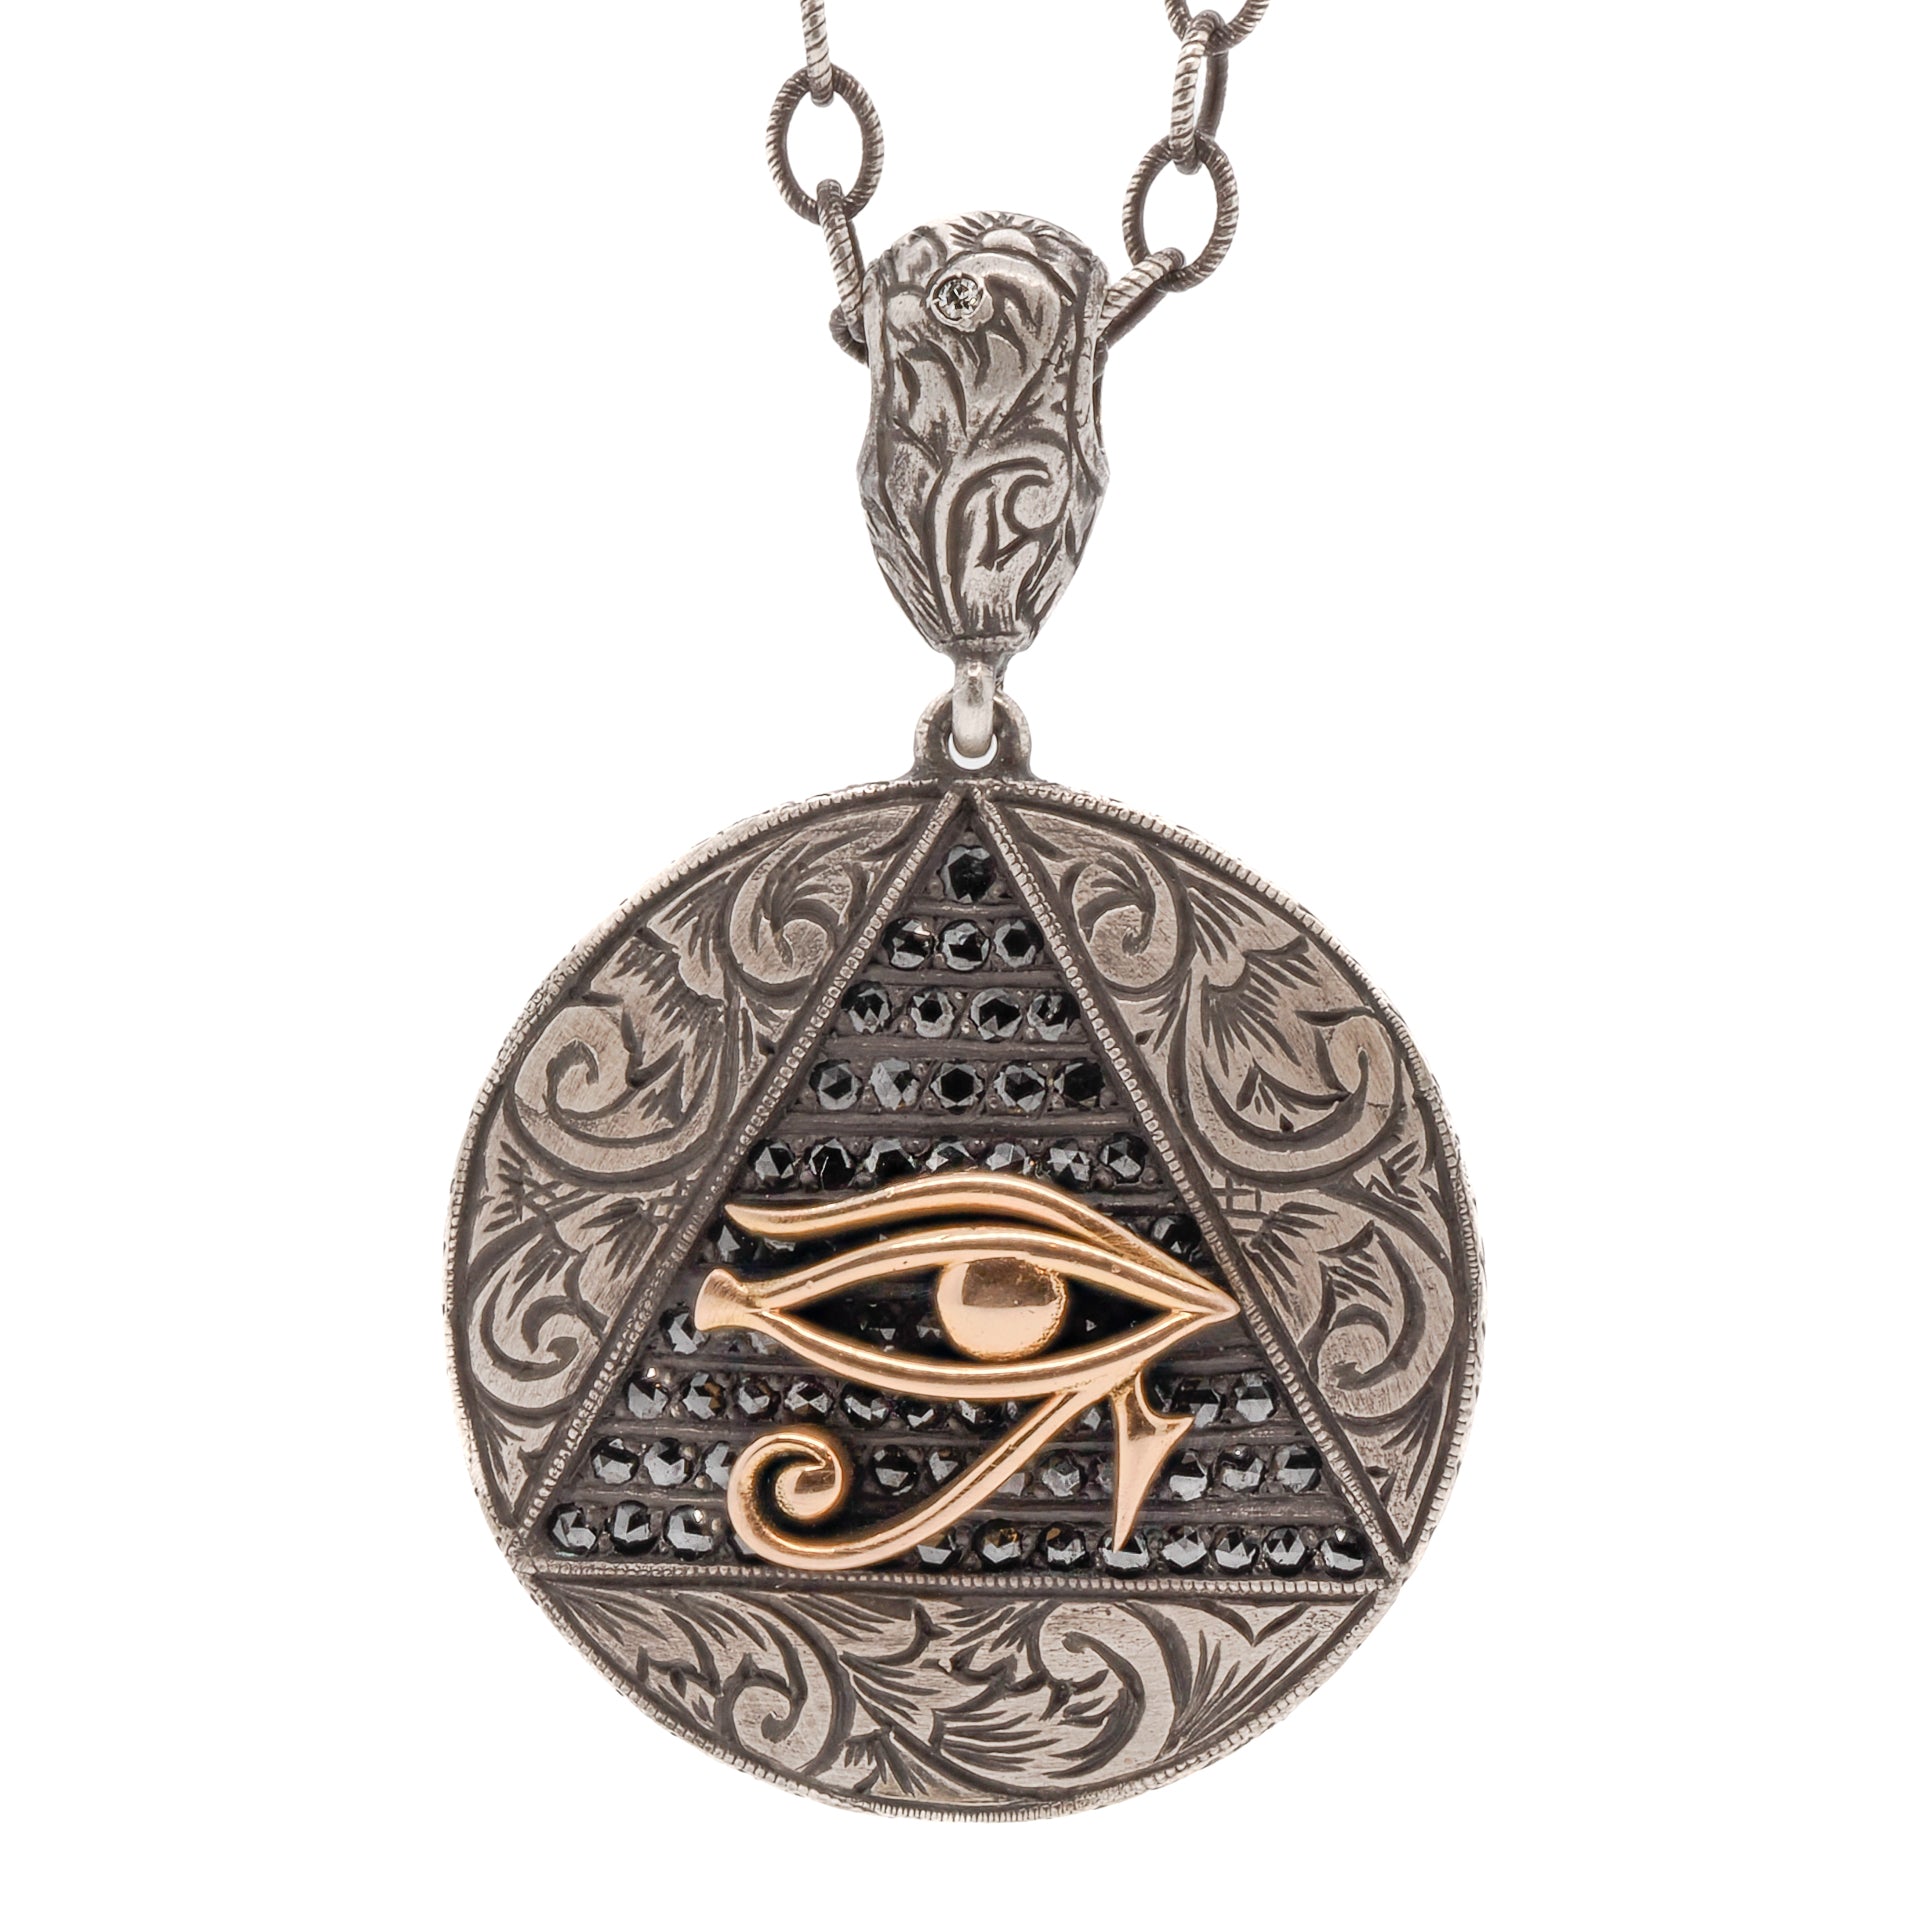 The All Seeing Eye Necklace - A Unique and Handcrafted Amulet Necklace from Ebru Jewelry&#39;s Fine Jewelry Series